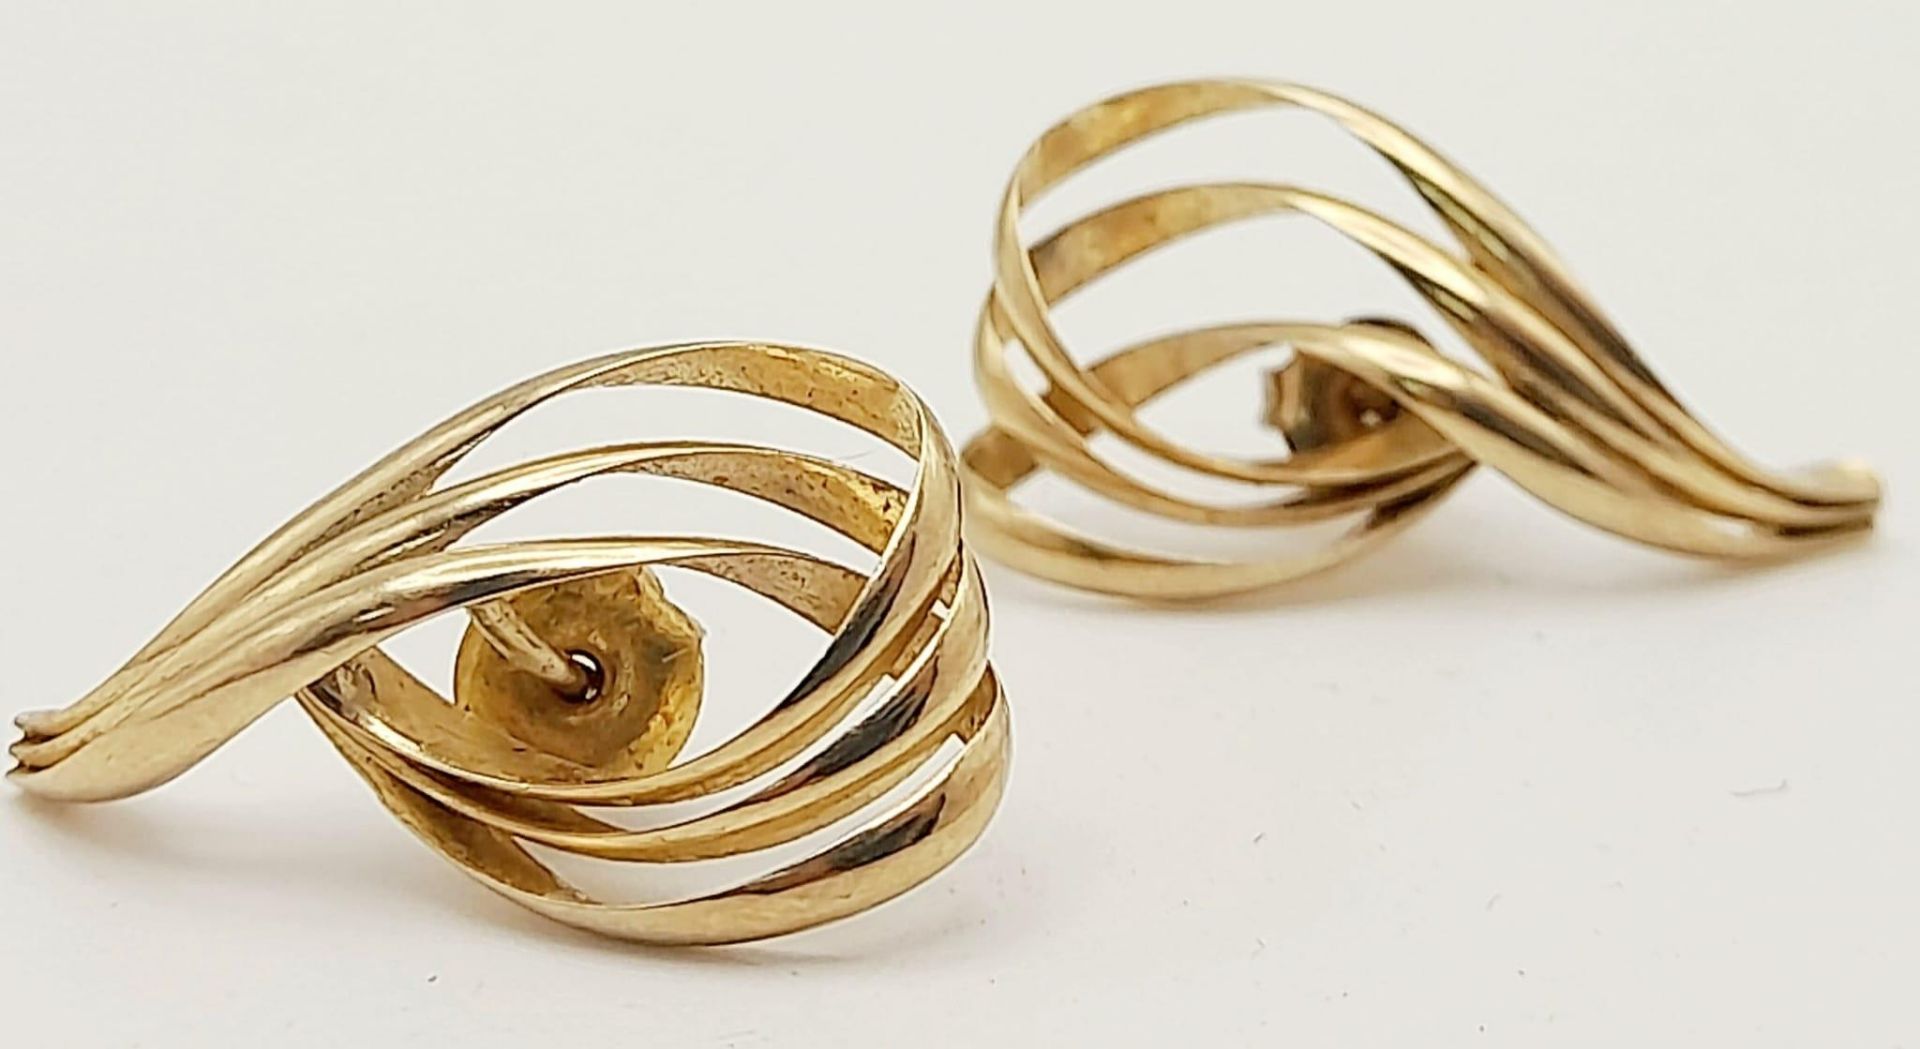 A Pair of 9K Yellow Gold Swirl Earrings. 2.55g total weight. - Image 2 of 11